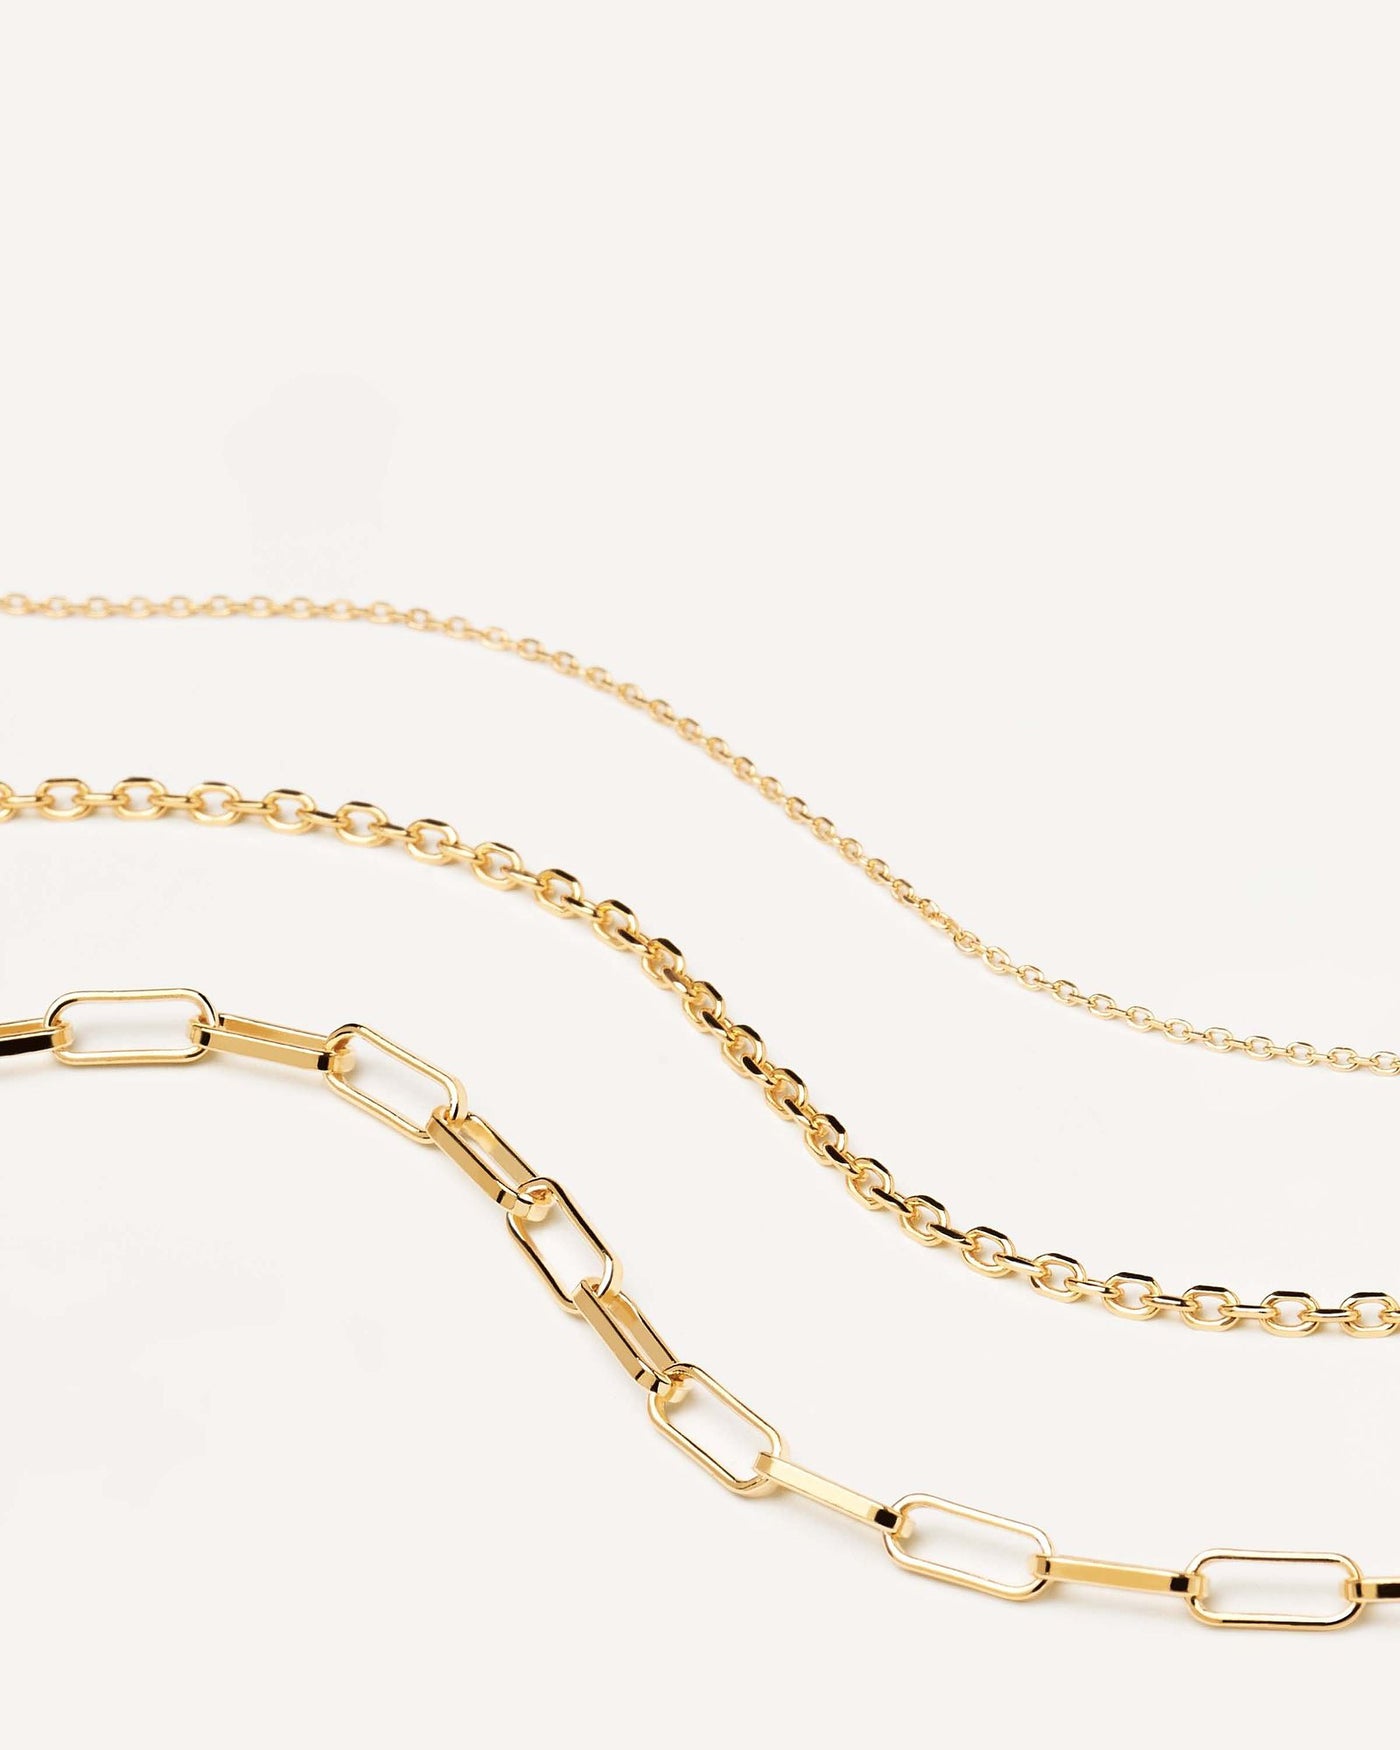 2024 Selection | Essential Necklaces Set. Set of stackable 18k gold plated silver chain necklaces in three link sizes and shapes. Get the latest arrival from PDPAOLA. Place your order safely and get this Best Seller. Free Shipping.